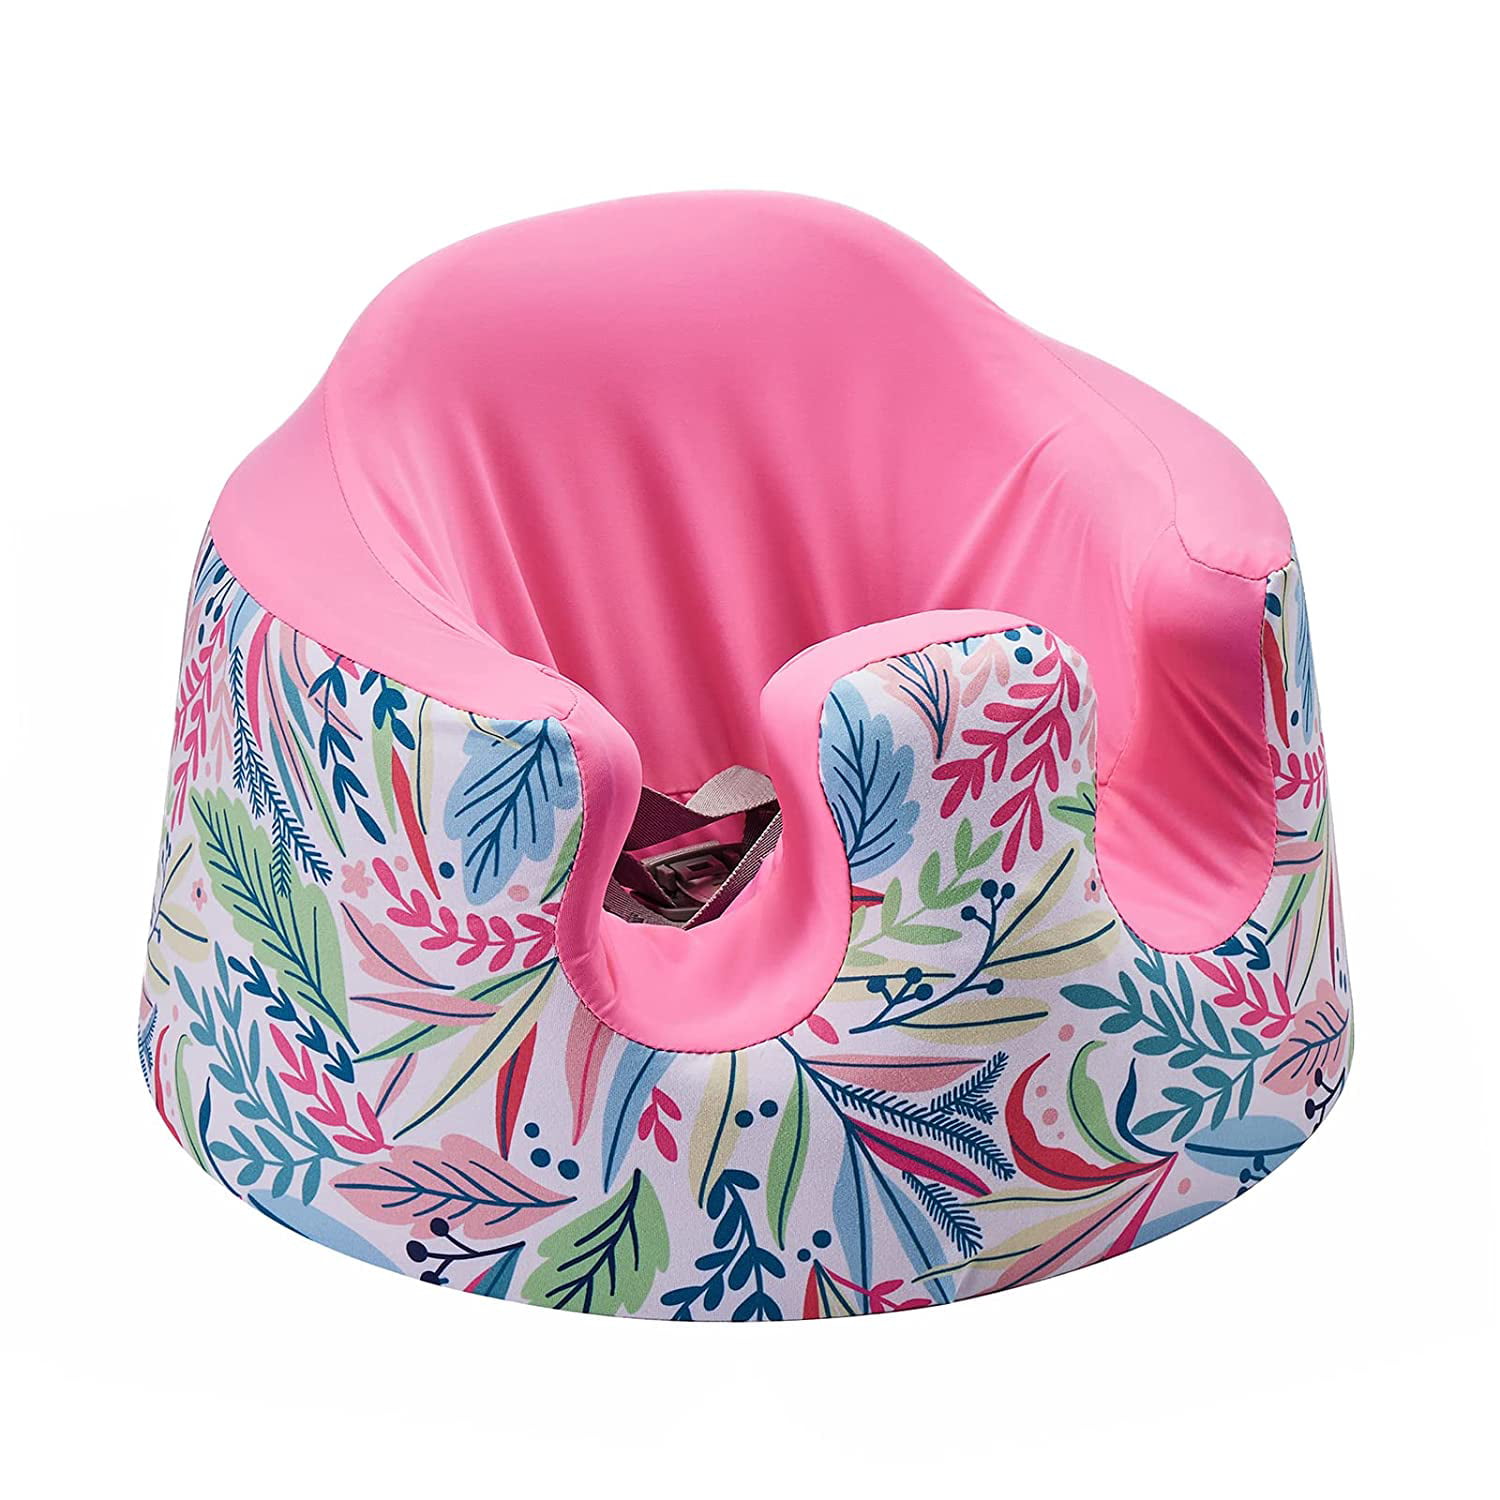 New Bumbo Floor Seat COVER • FLOWER TAIL FOX w/Pink Seat • Safety Strap Ready 